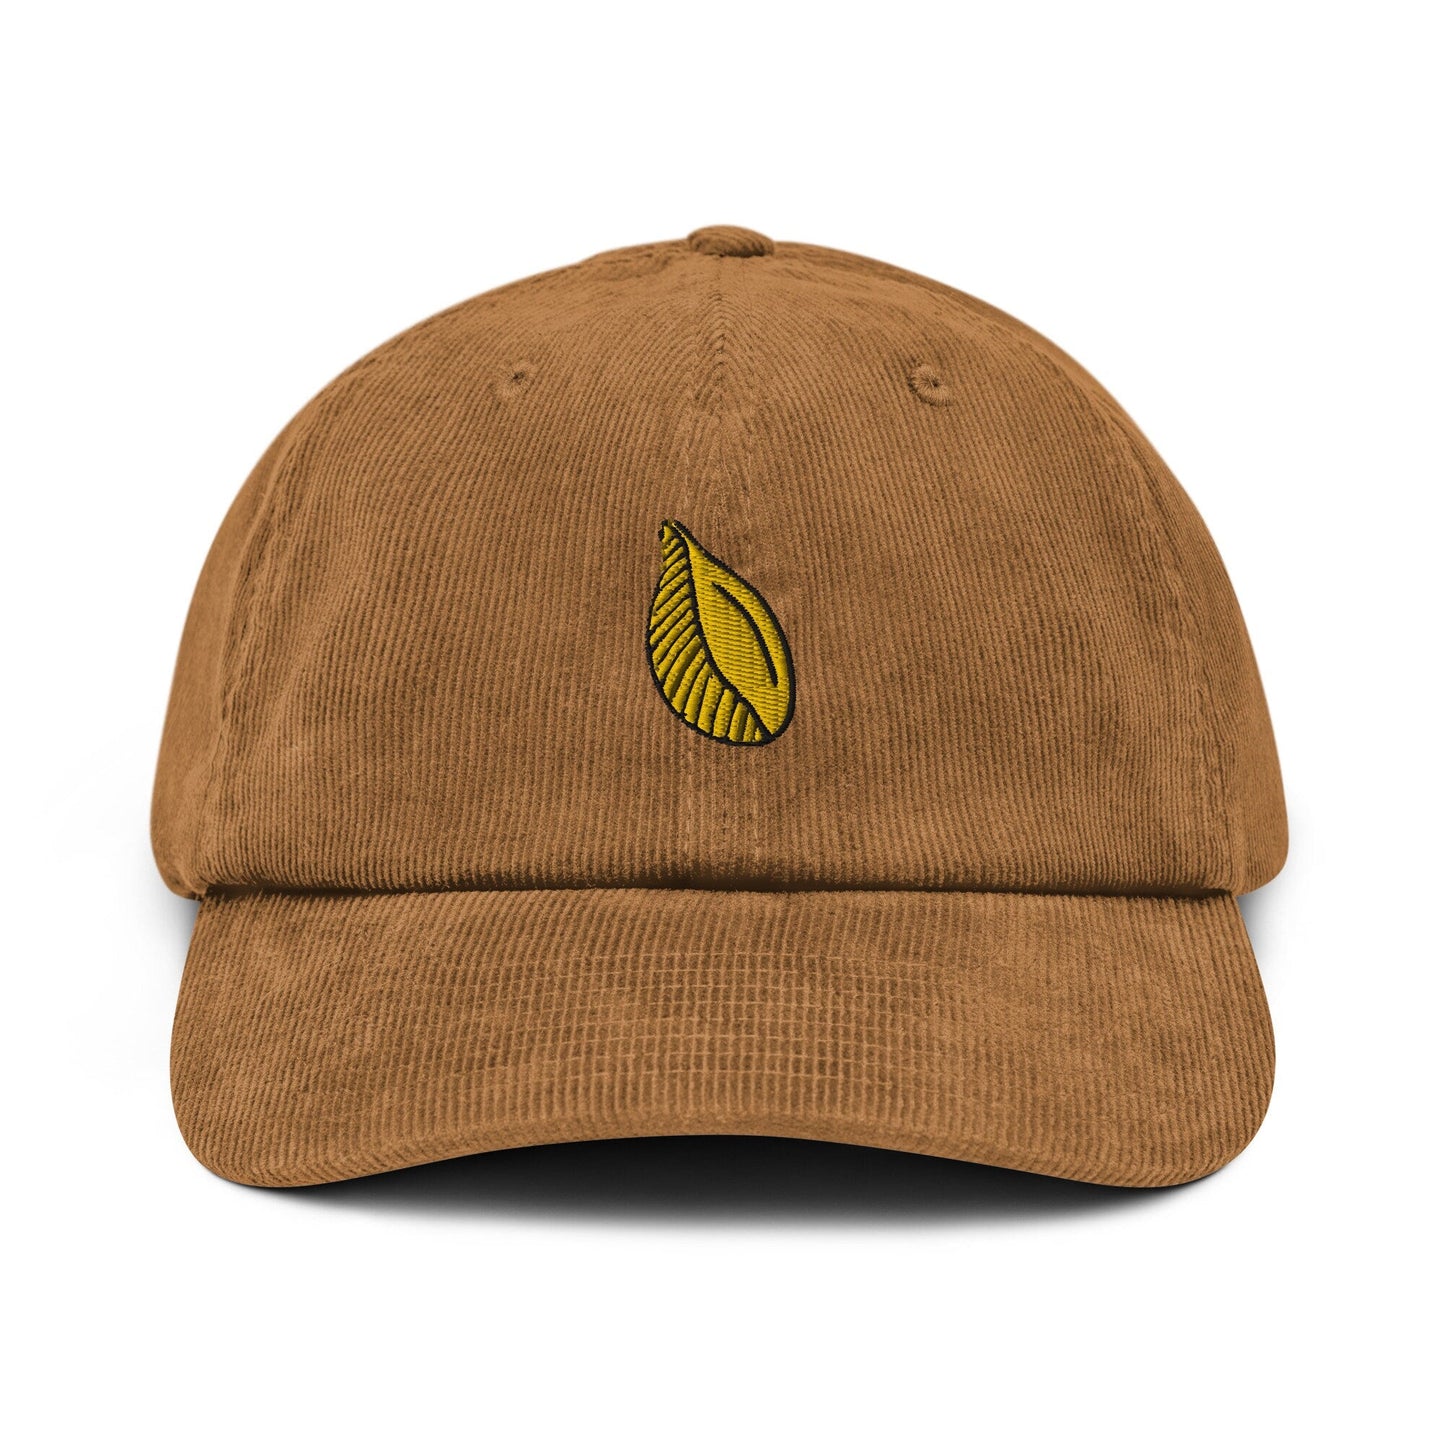 Conchiglie Corduroy Dad Hat - Gift for Italian Pasta Lovers - Handmade Embroidered Cap - Evilwater Originals